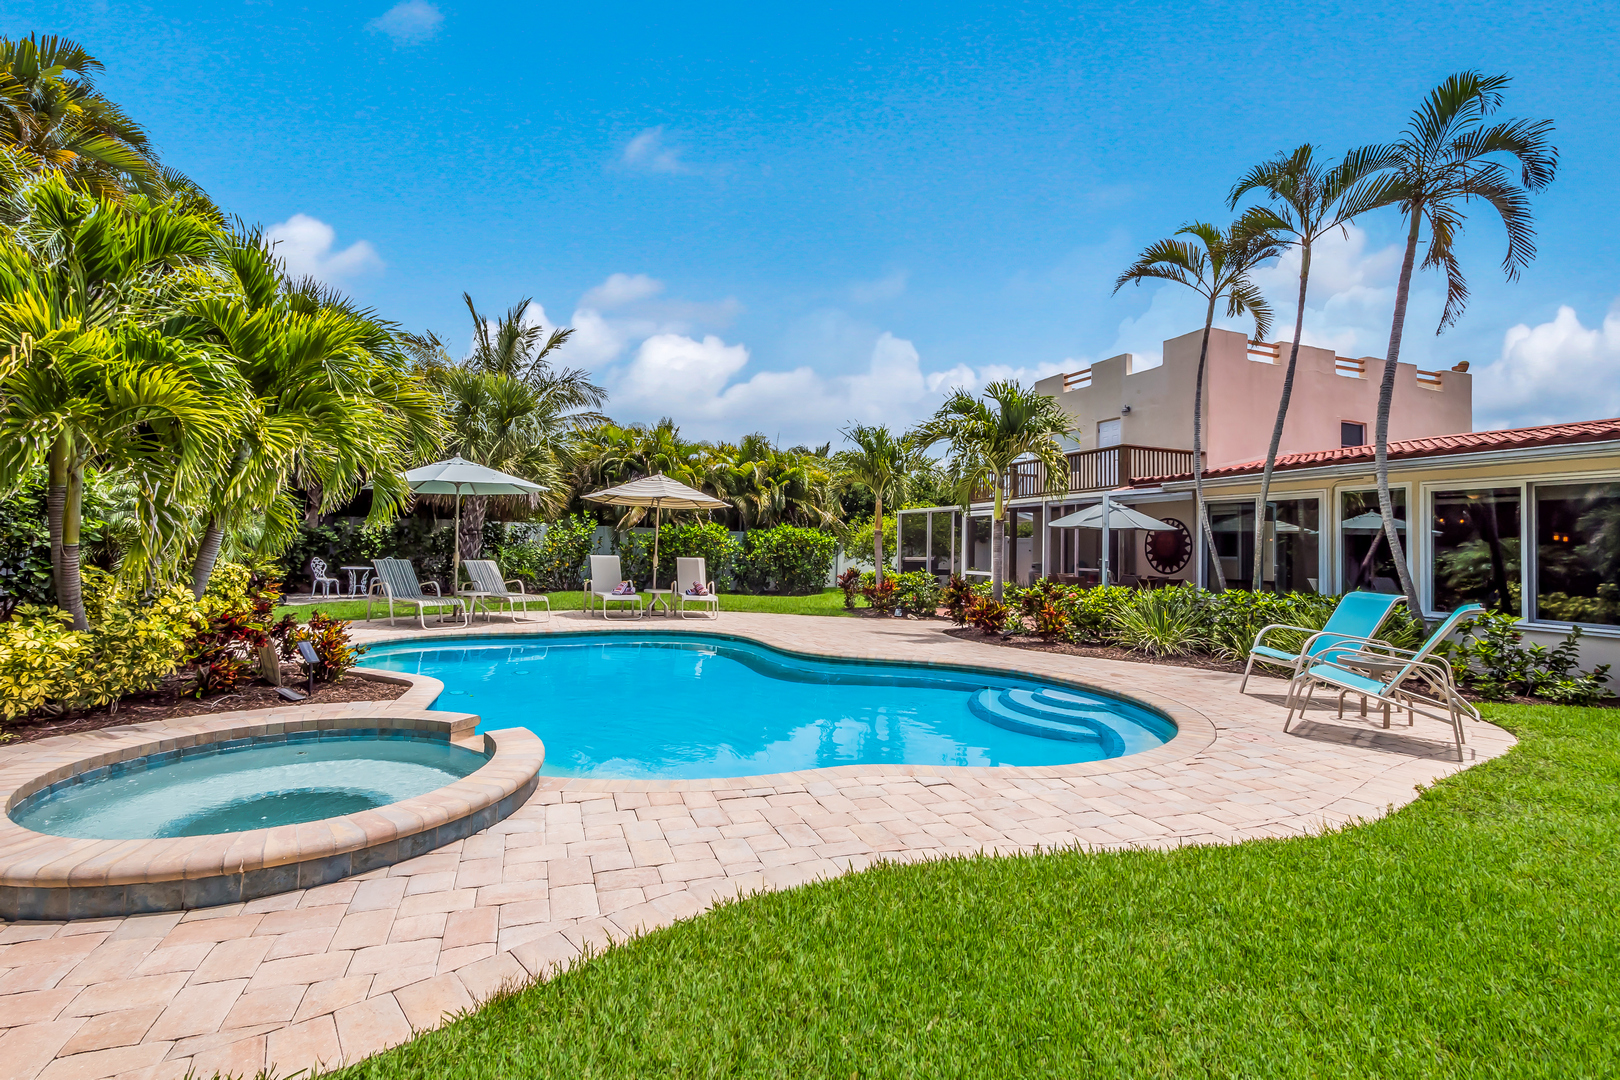 The large tropical back yard and lagoon style pool and spa at Glory Days, a vacation rental by Anna Maria Life Vacation Rentals